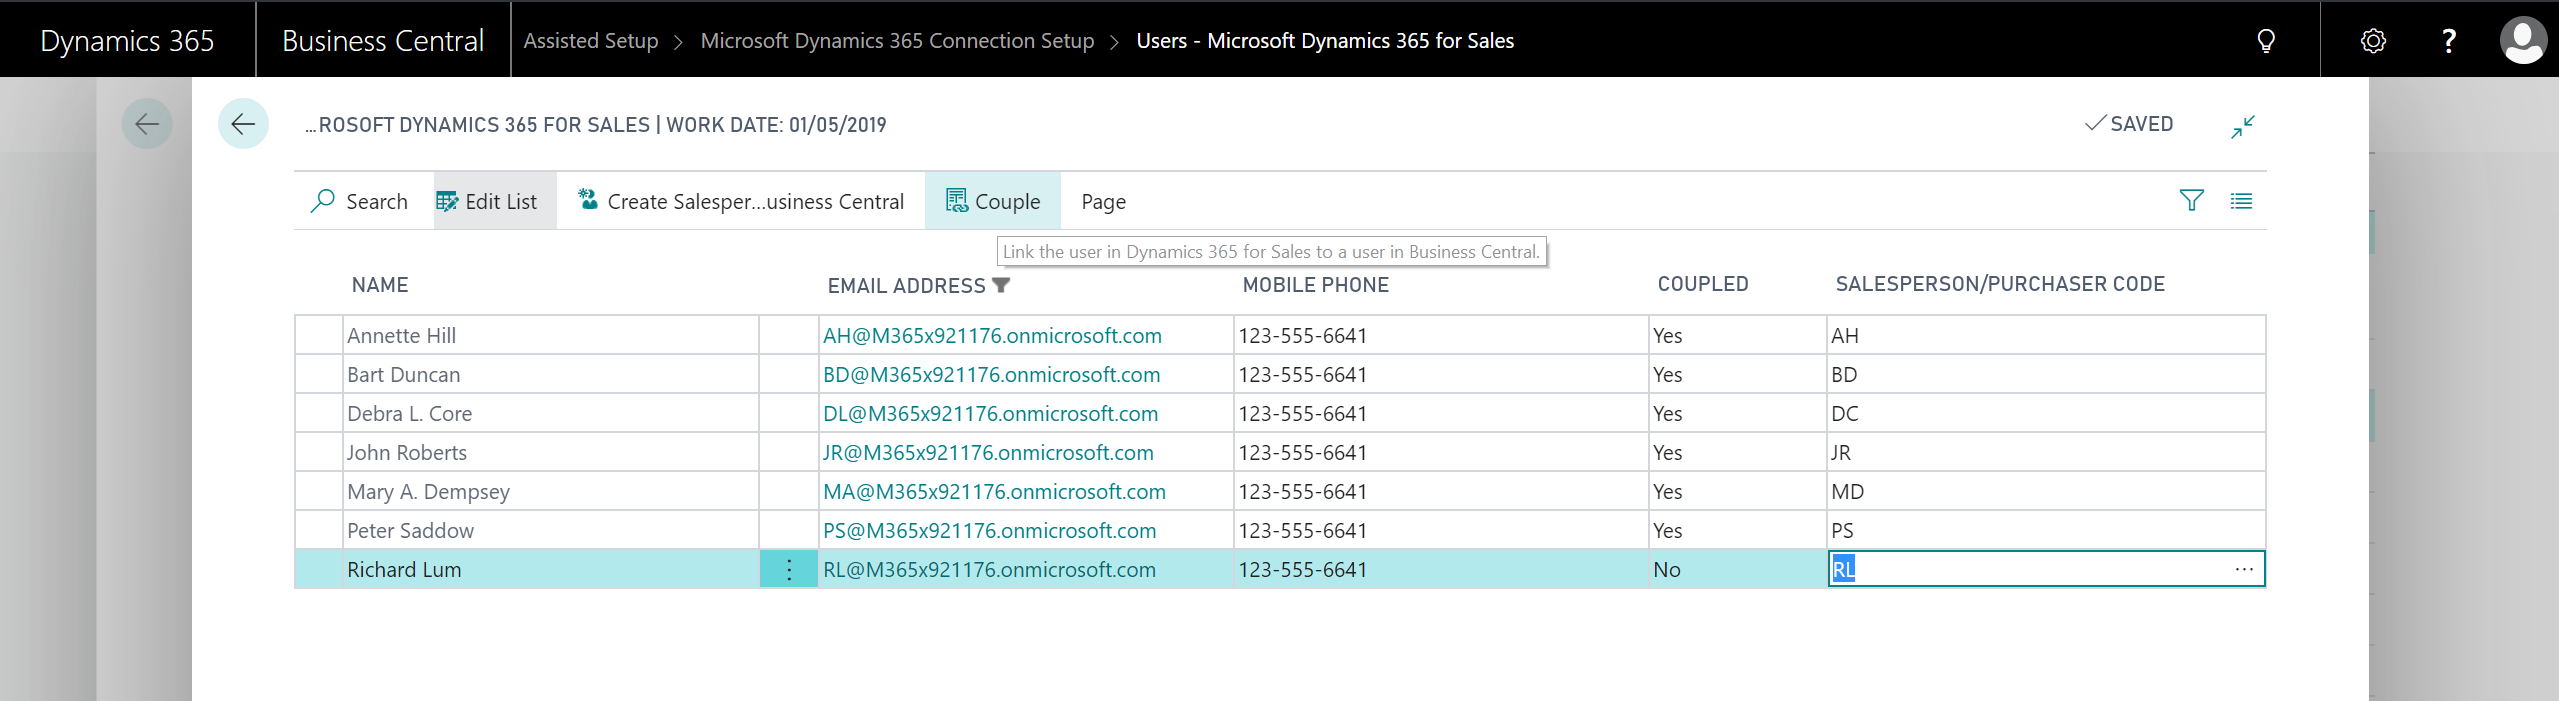 Coupling sales people to users in Dynamics 365 for Sales